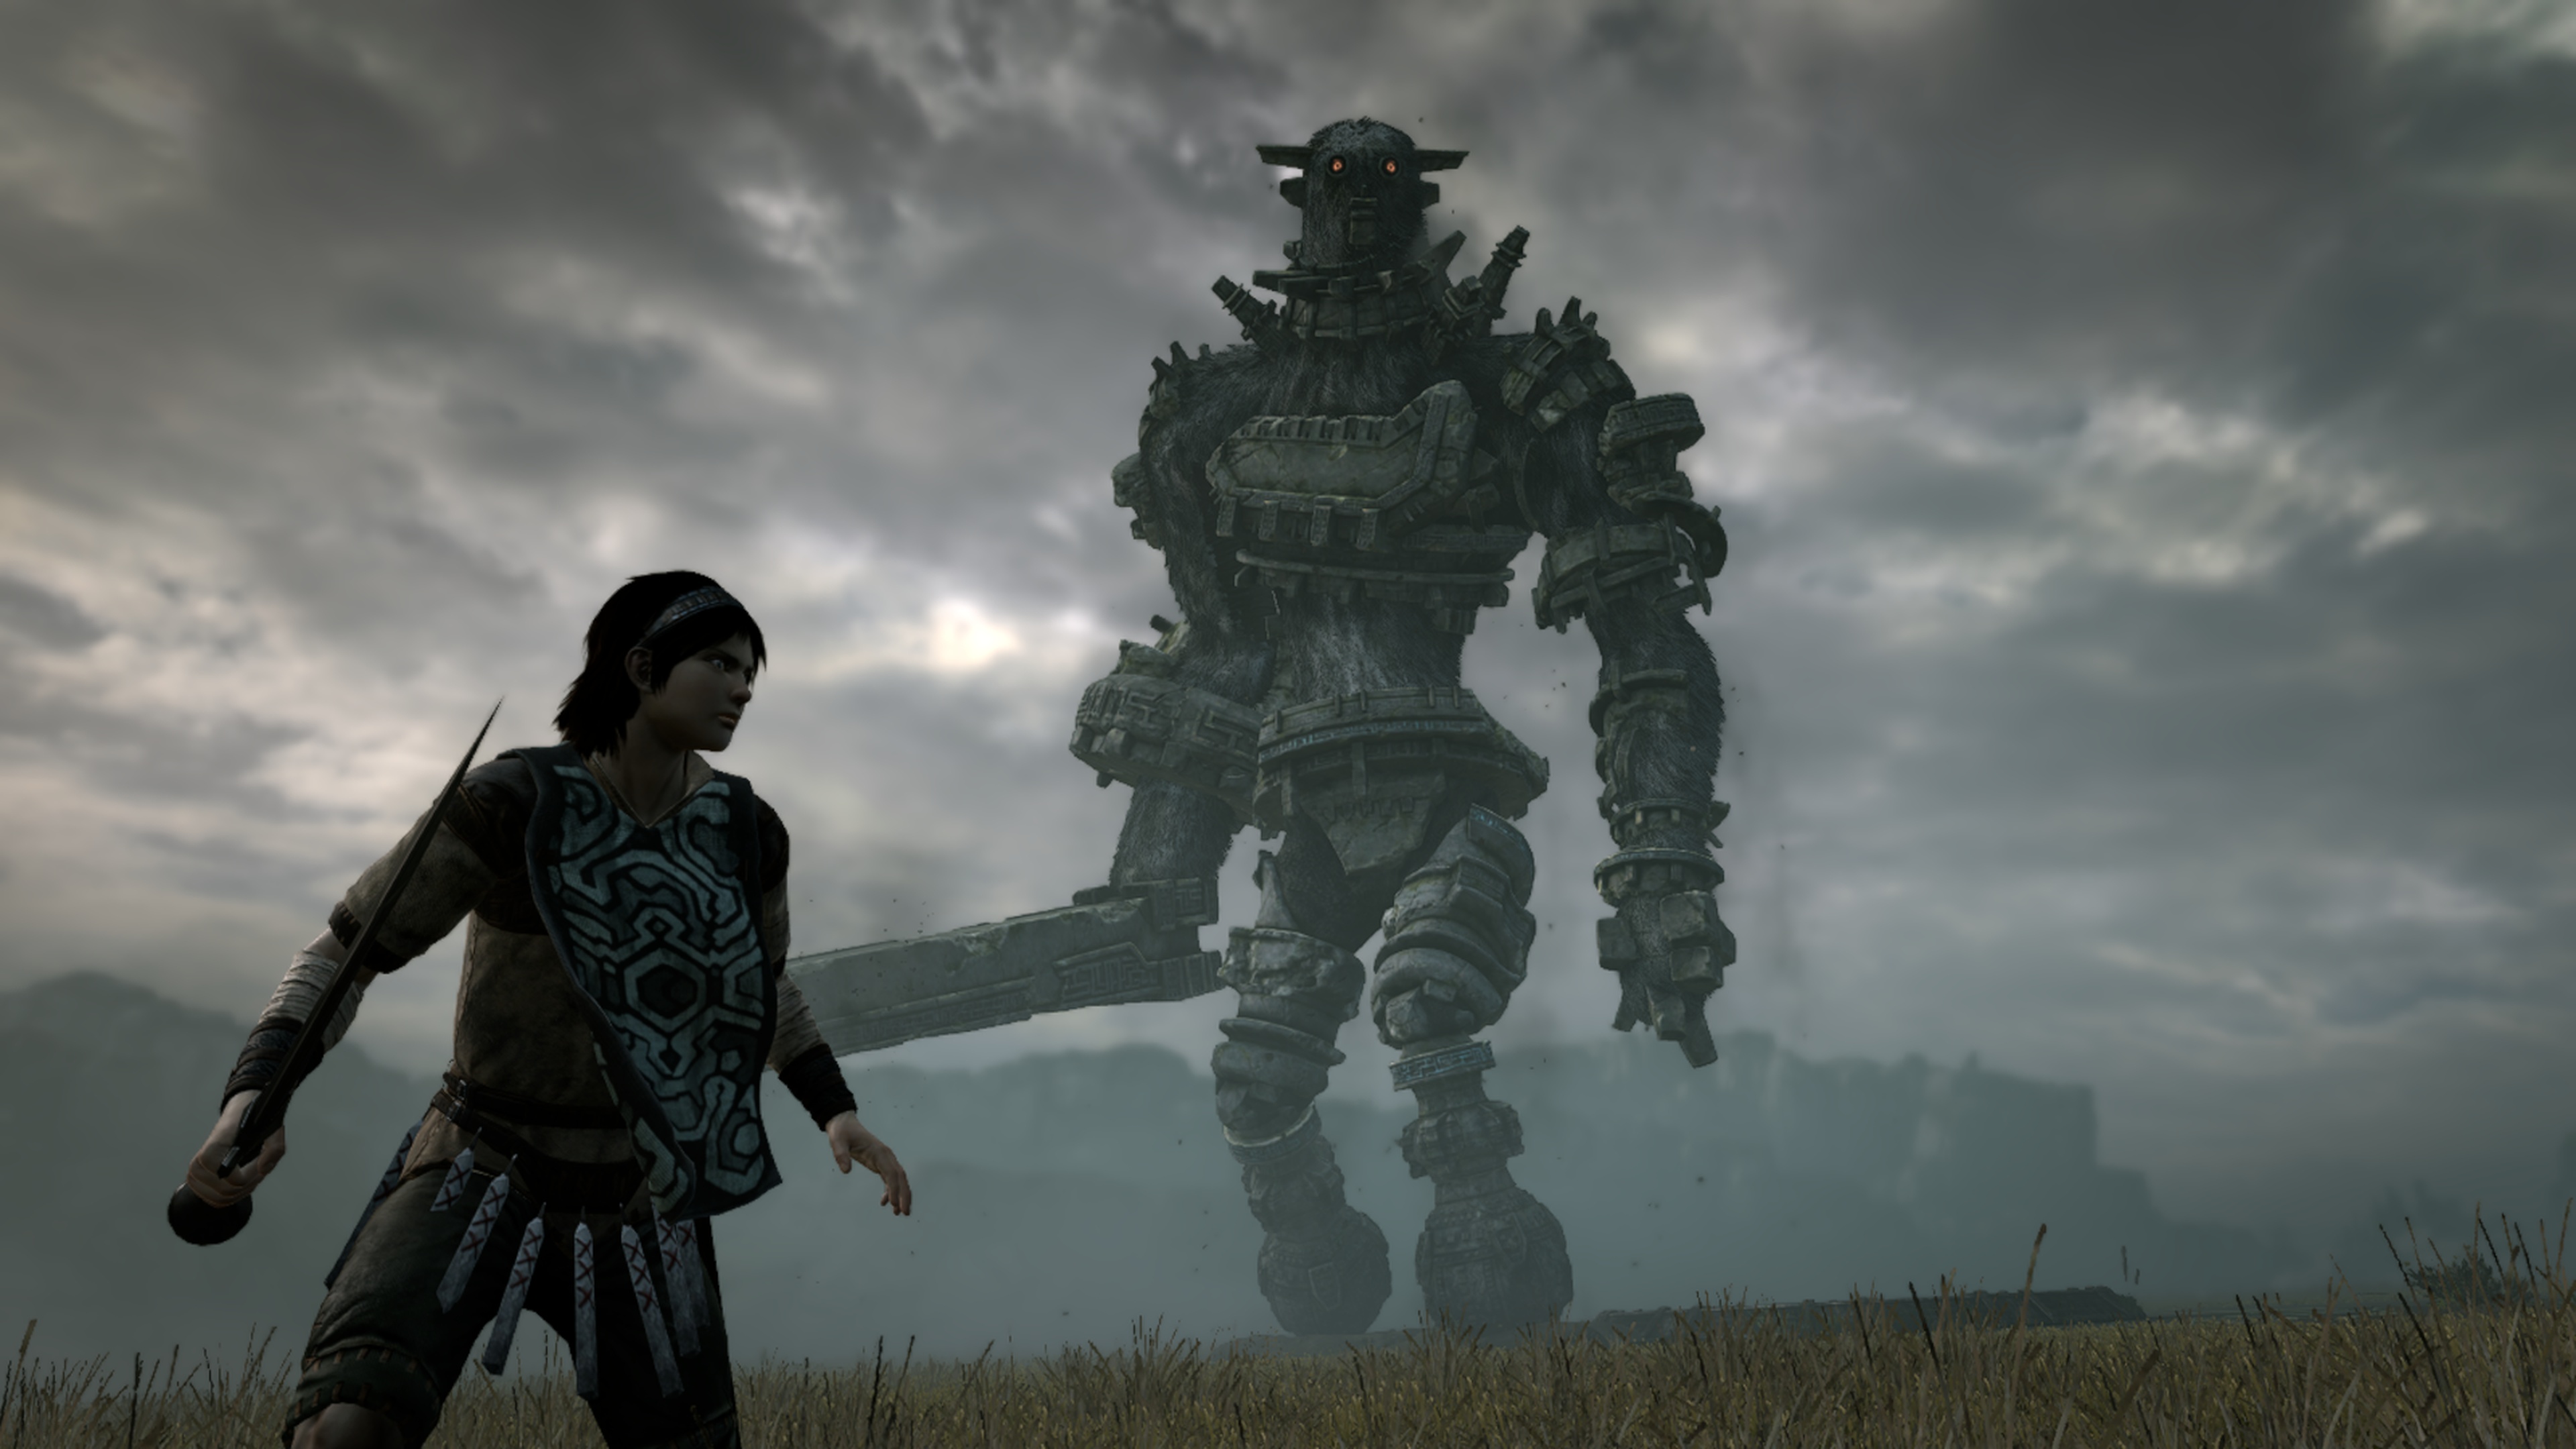 Shadow of colossus pc. Shadow of the Colossus колоссы. Shadow of the Colossus 3 Колос. Shadow of the Colossus Boss. В тени Колосса 2 босс.